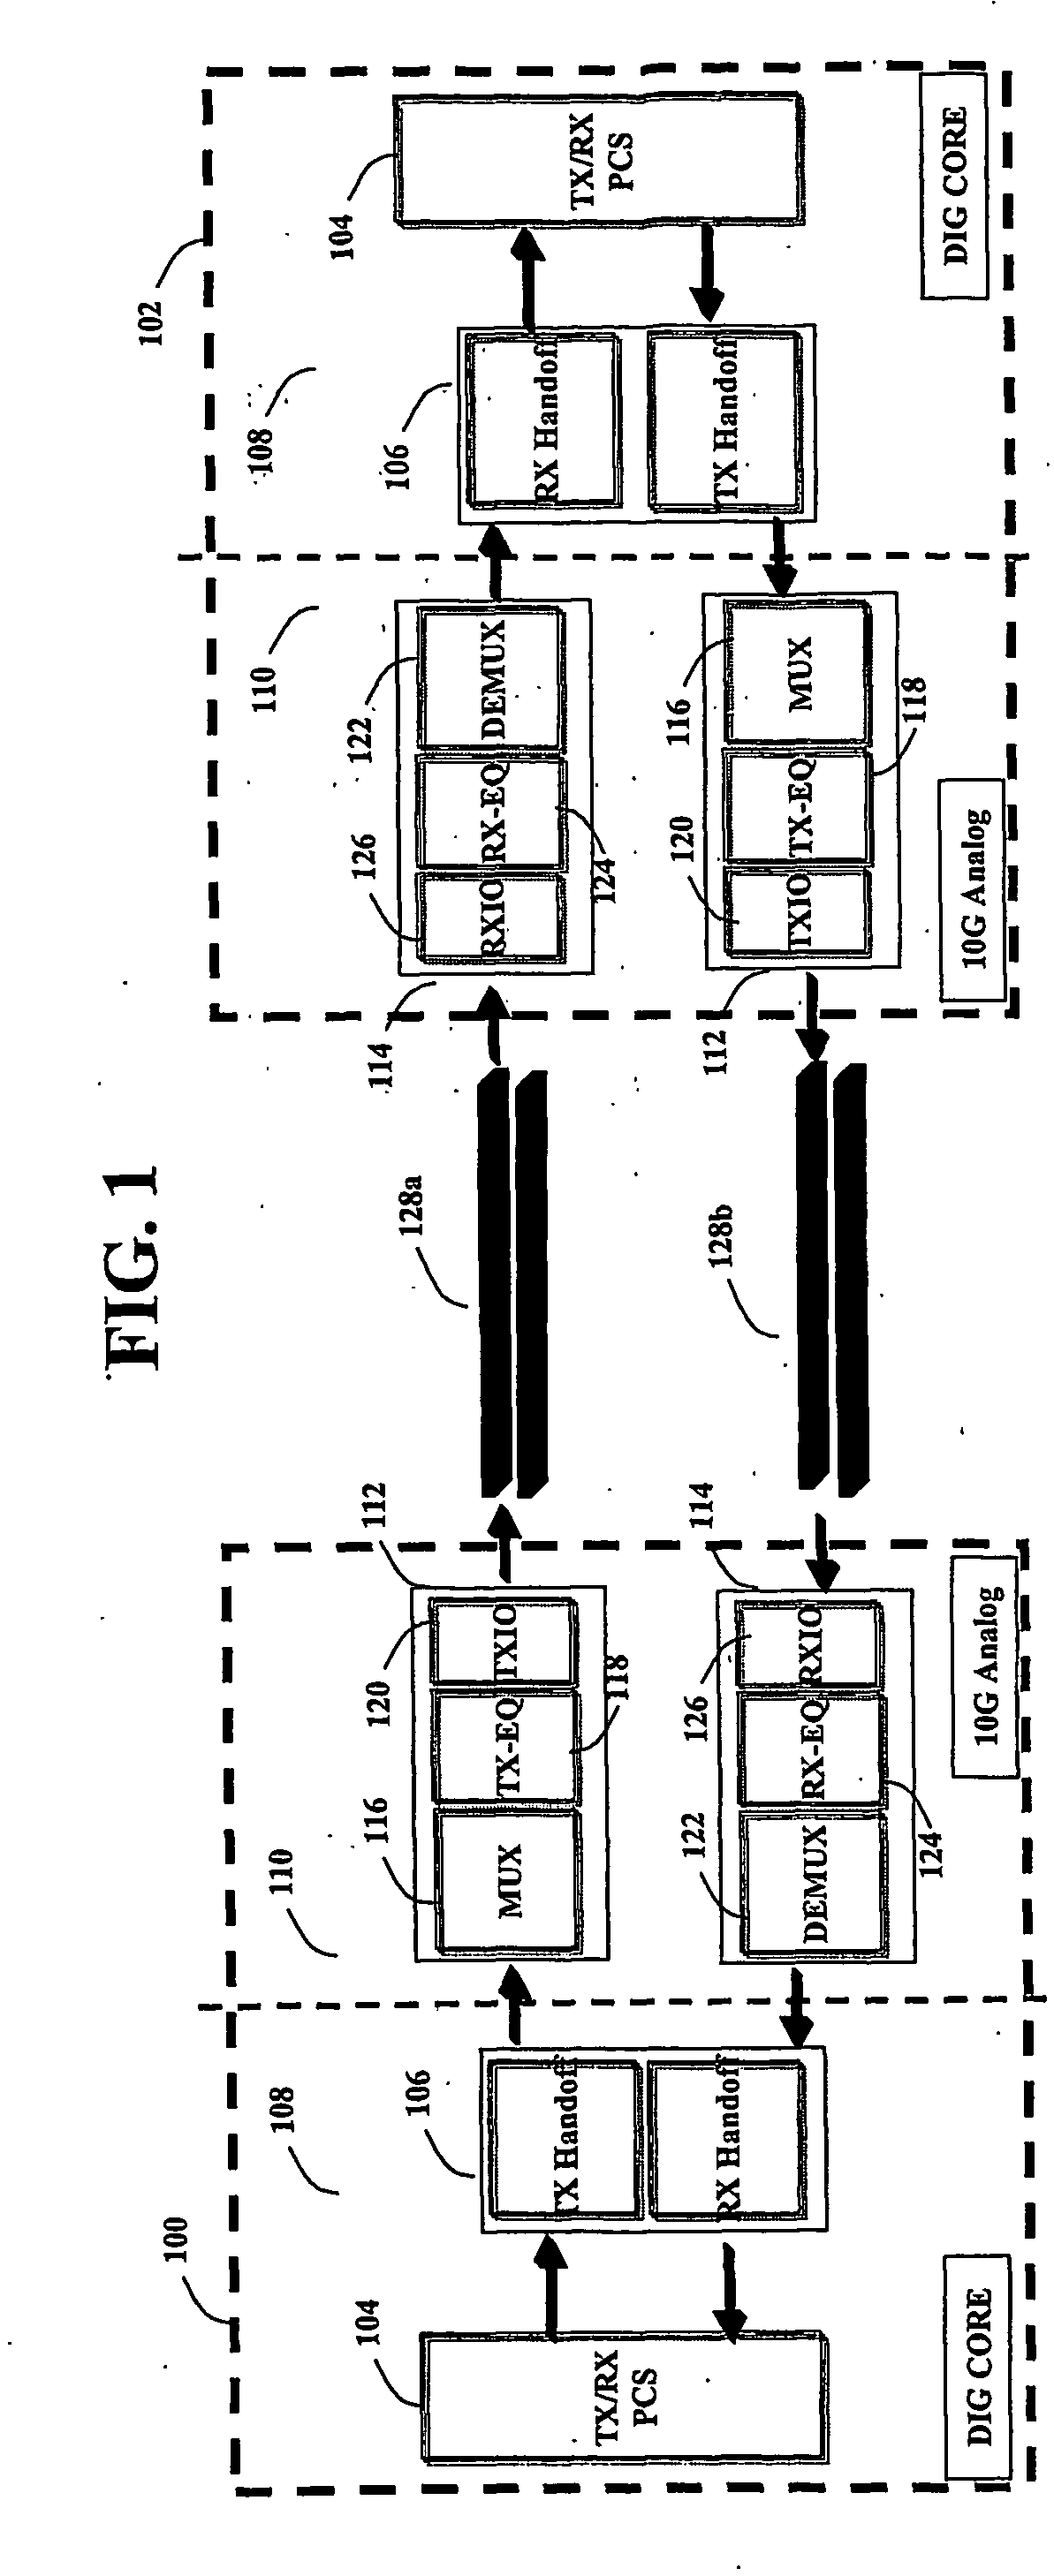 Operating frequency reduction for transversal fir filter